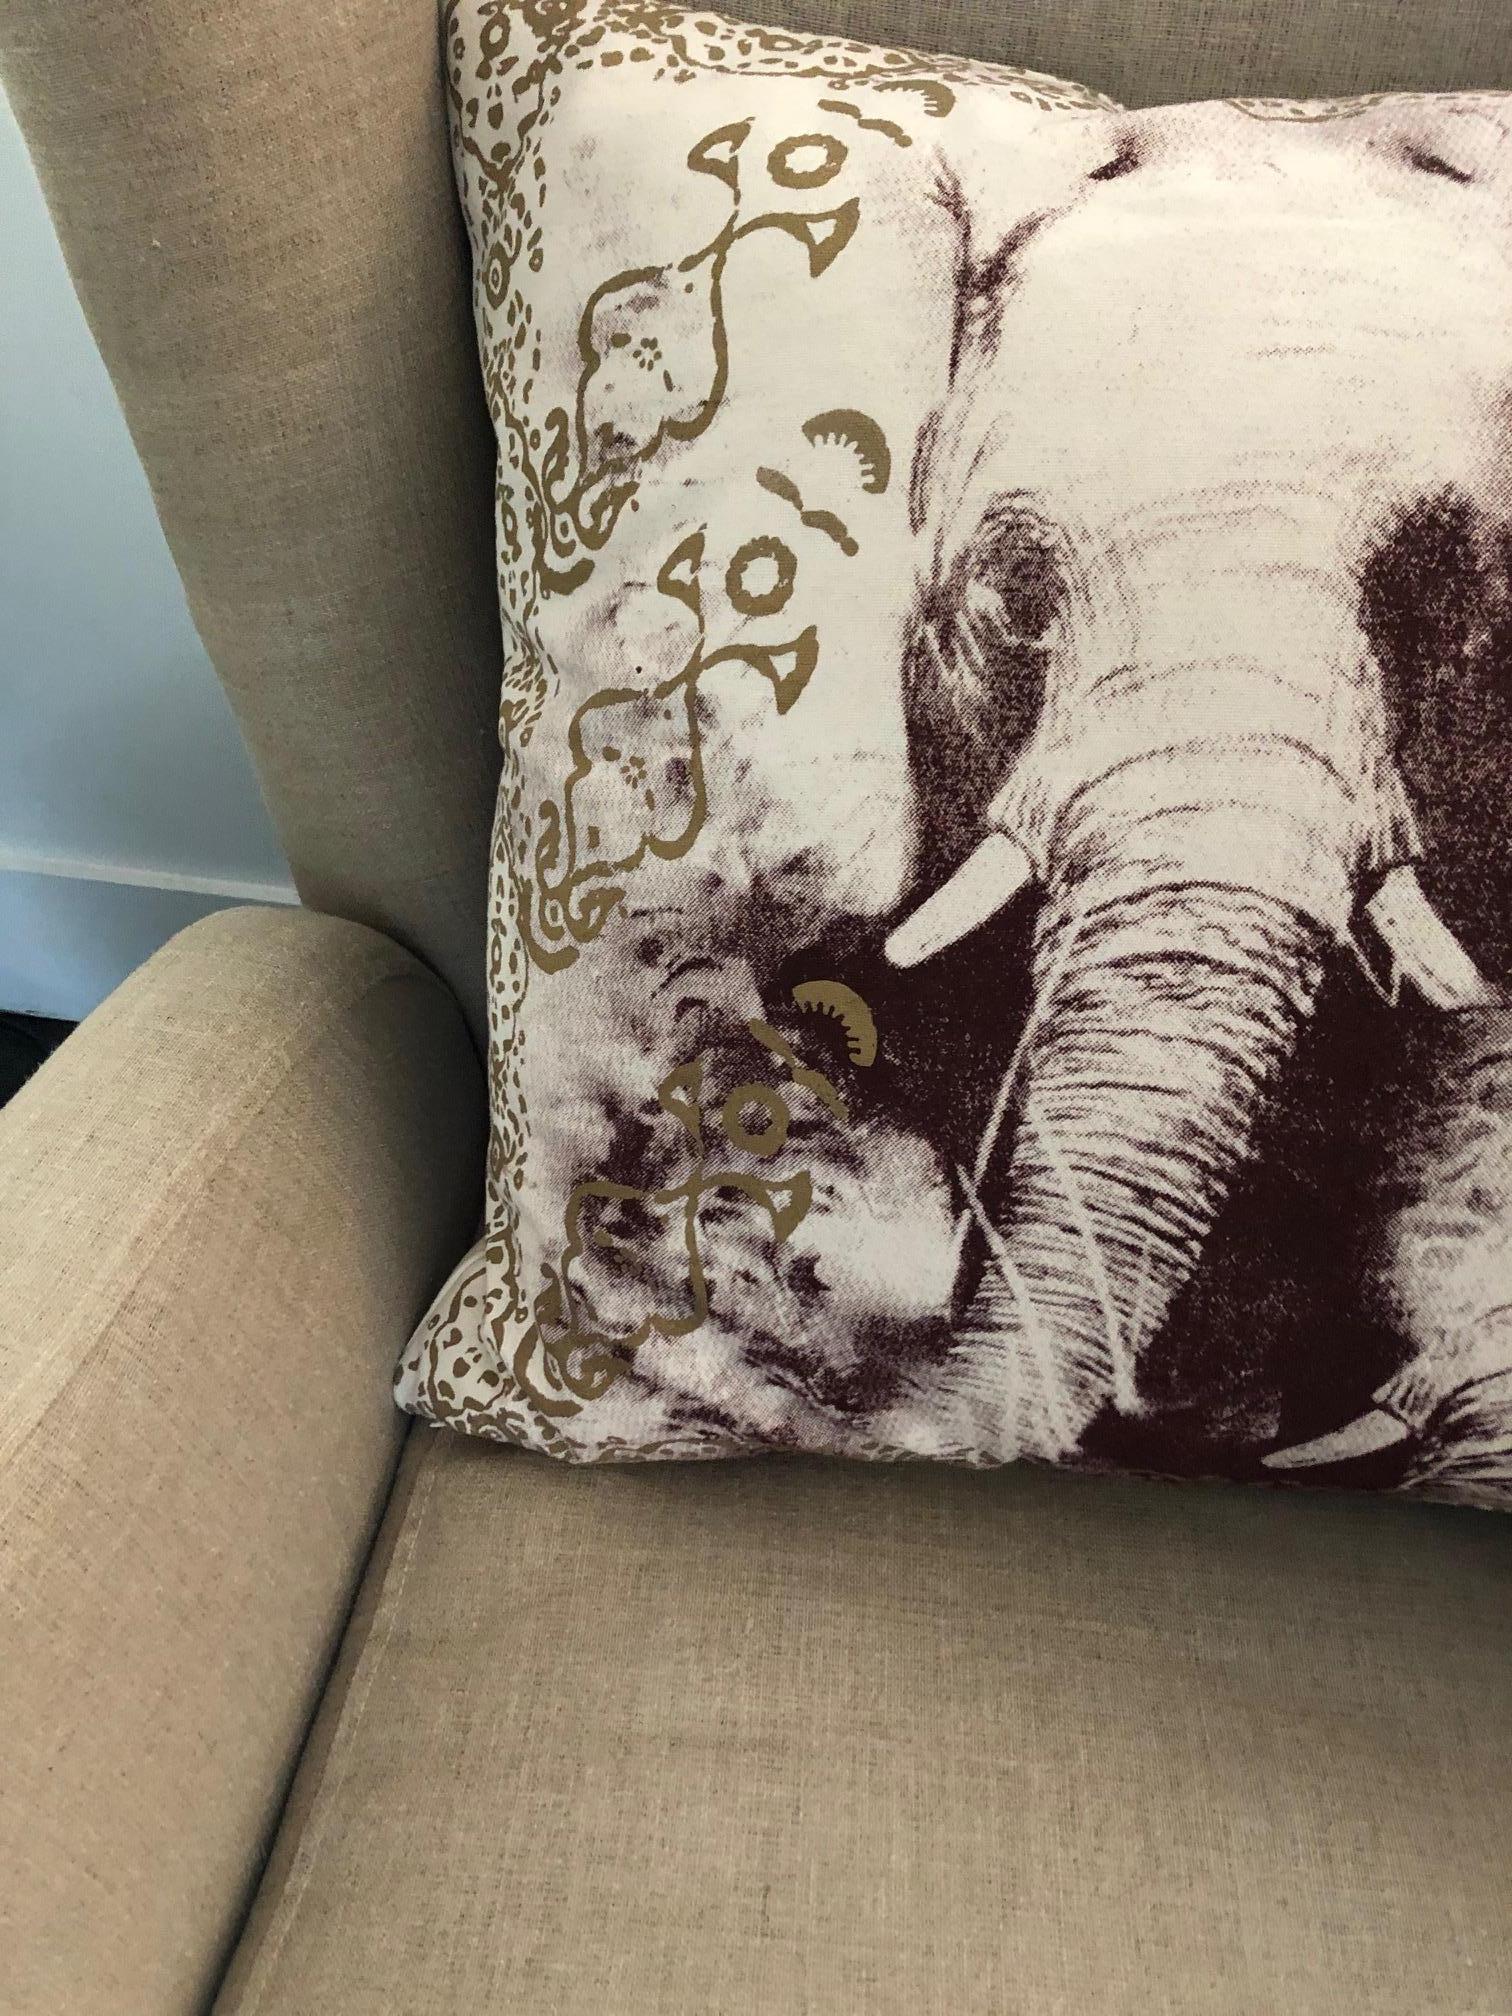 Silk screened image of an elephant with decorative border around pillow, design is the same on reverse side. Screened on raw cotton, has a poly/dac inserts. Sold as a pair only. Made in USA.